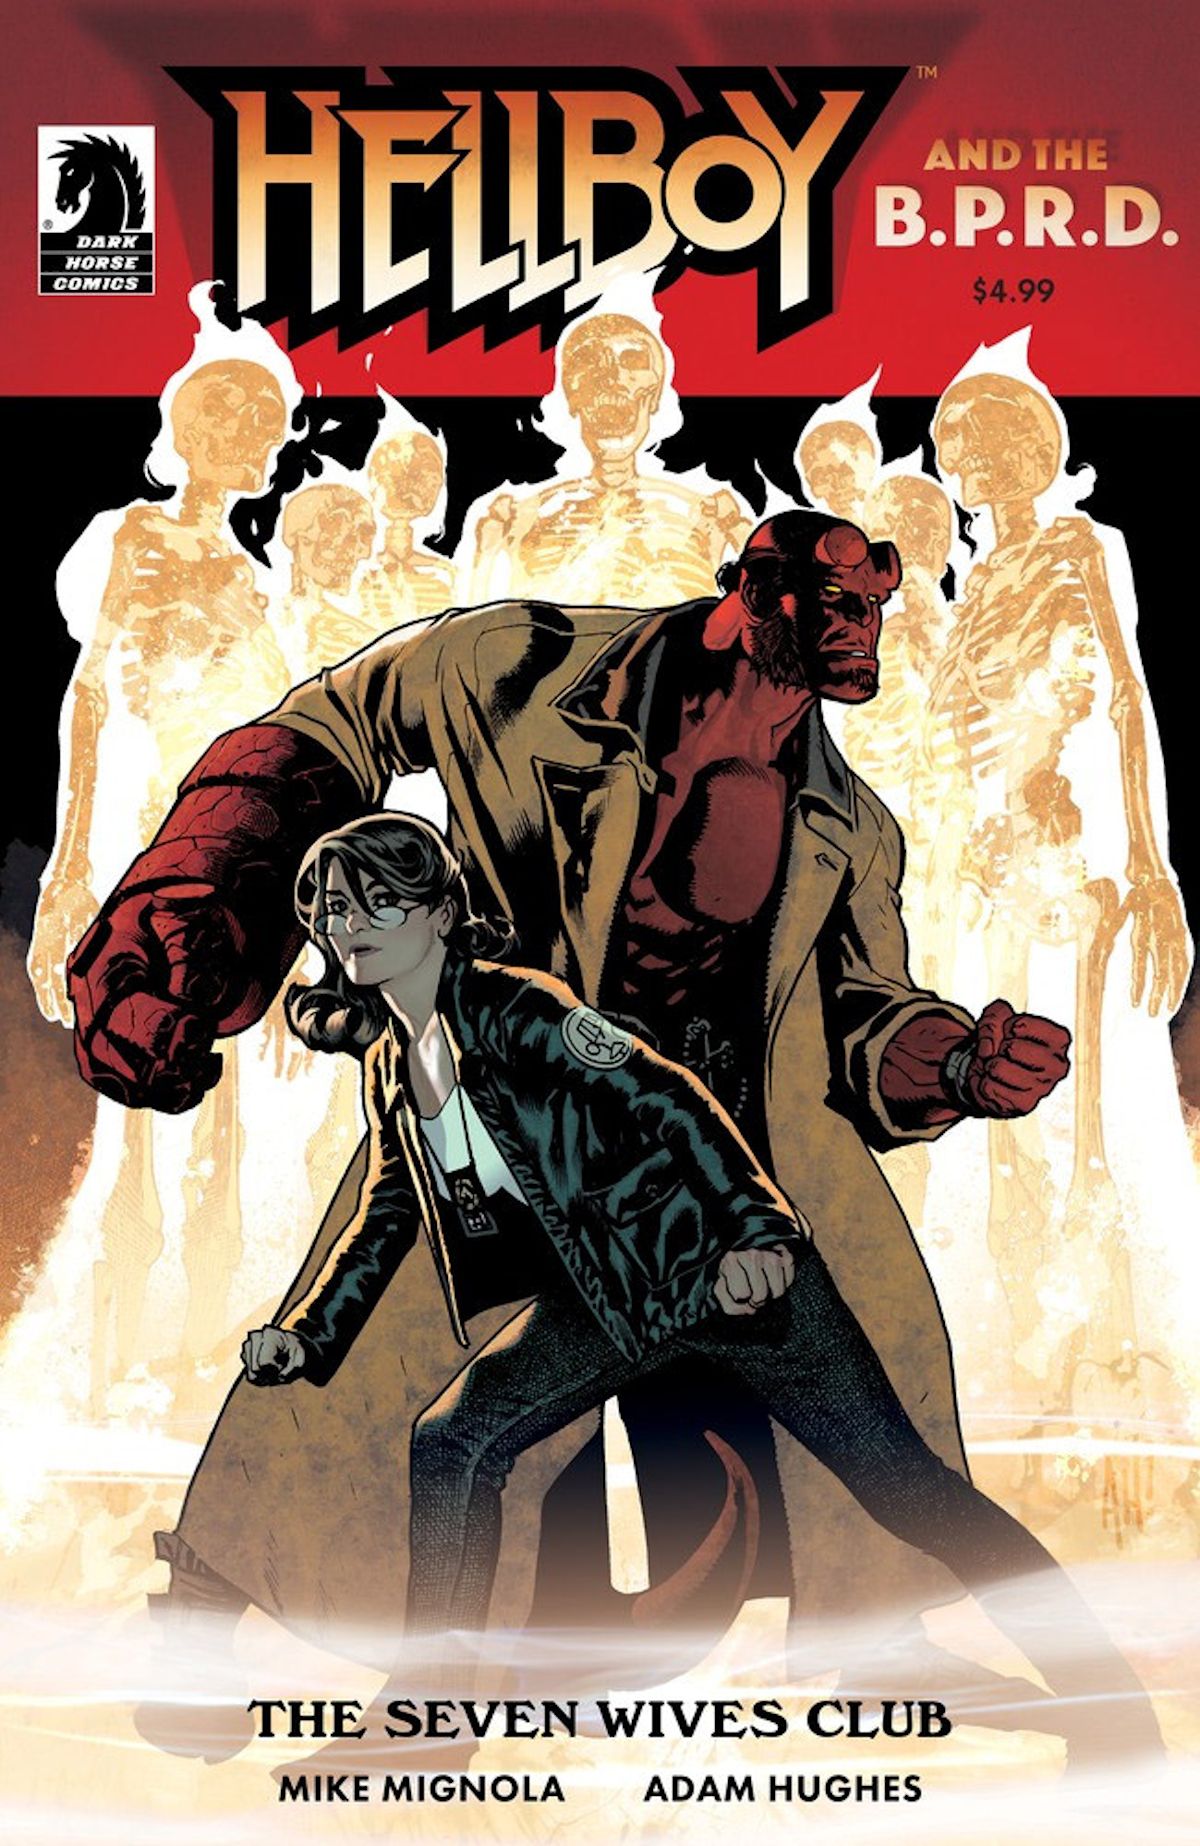 Hellboy and the BPRD Seven Wives Club